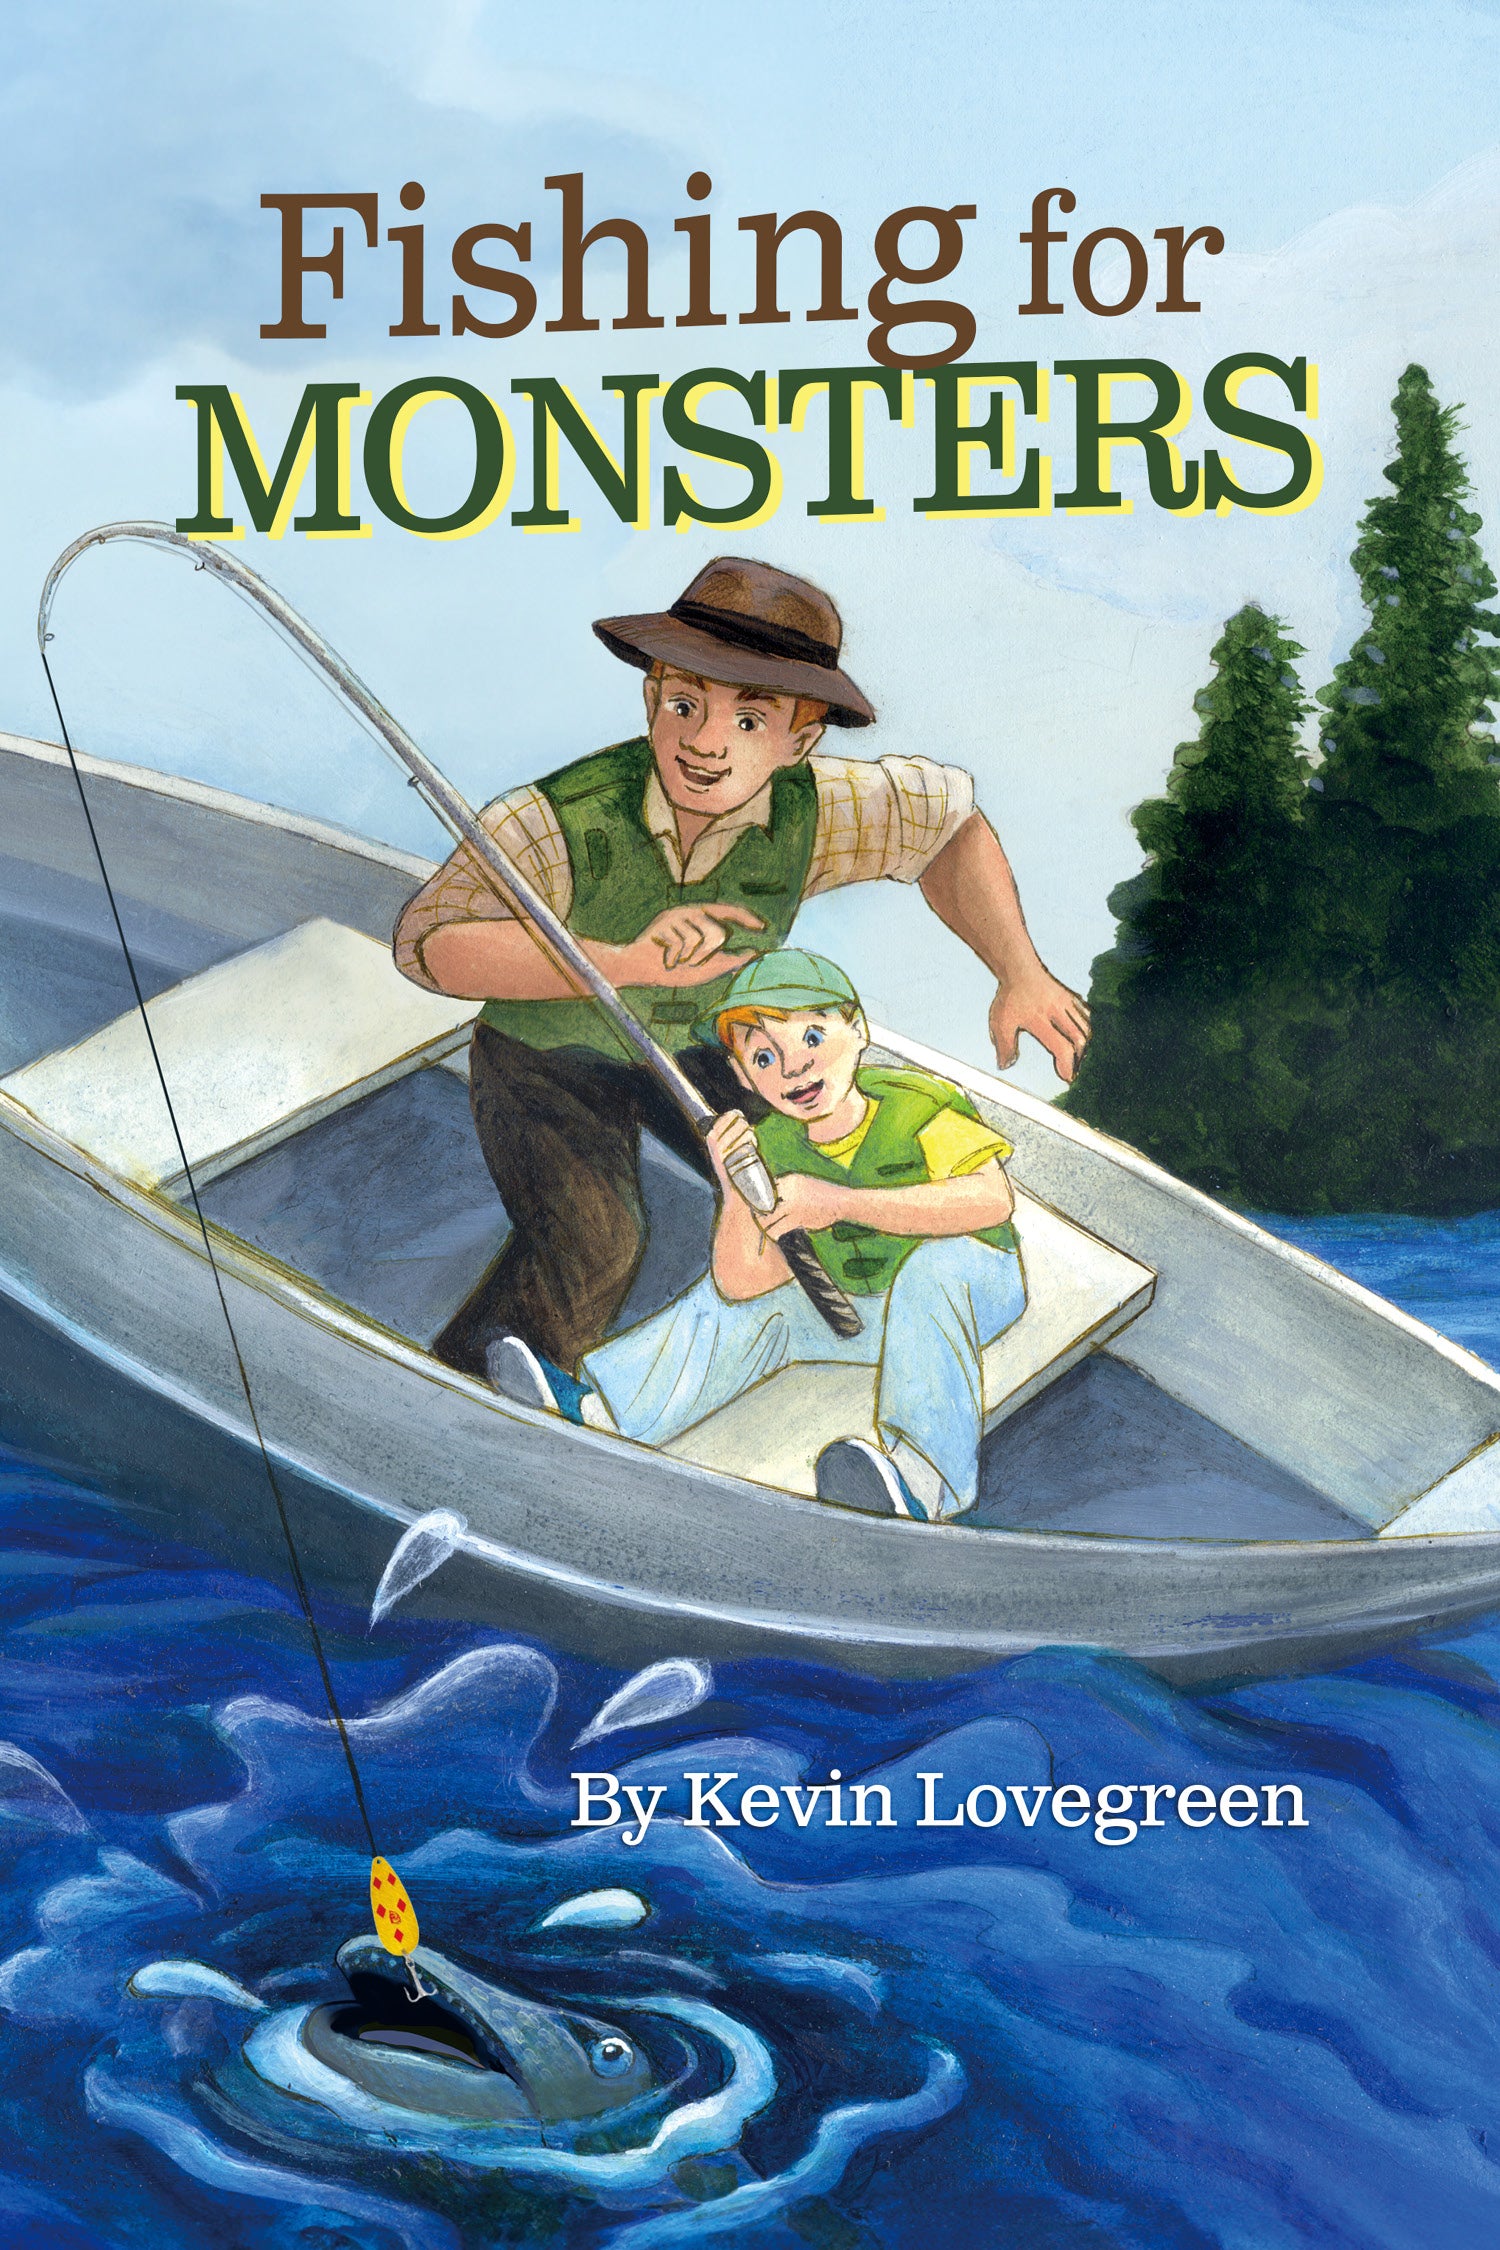 Fishing for Monsters (New Release)